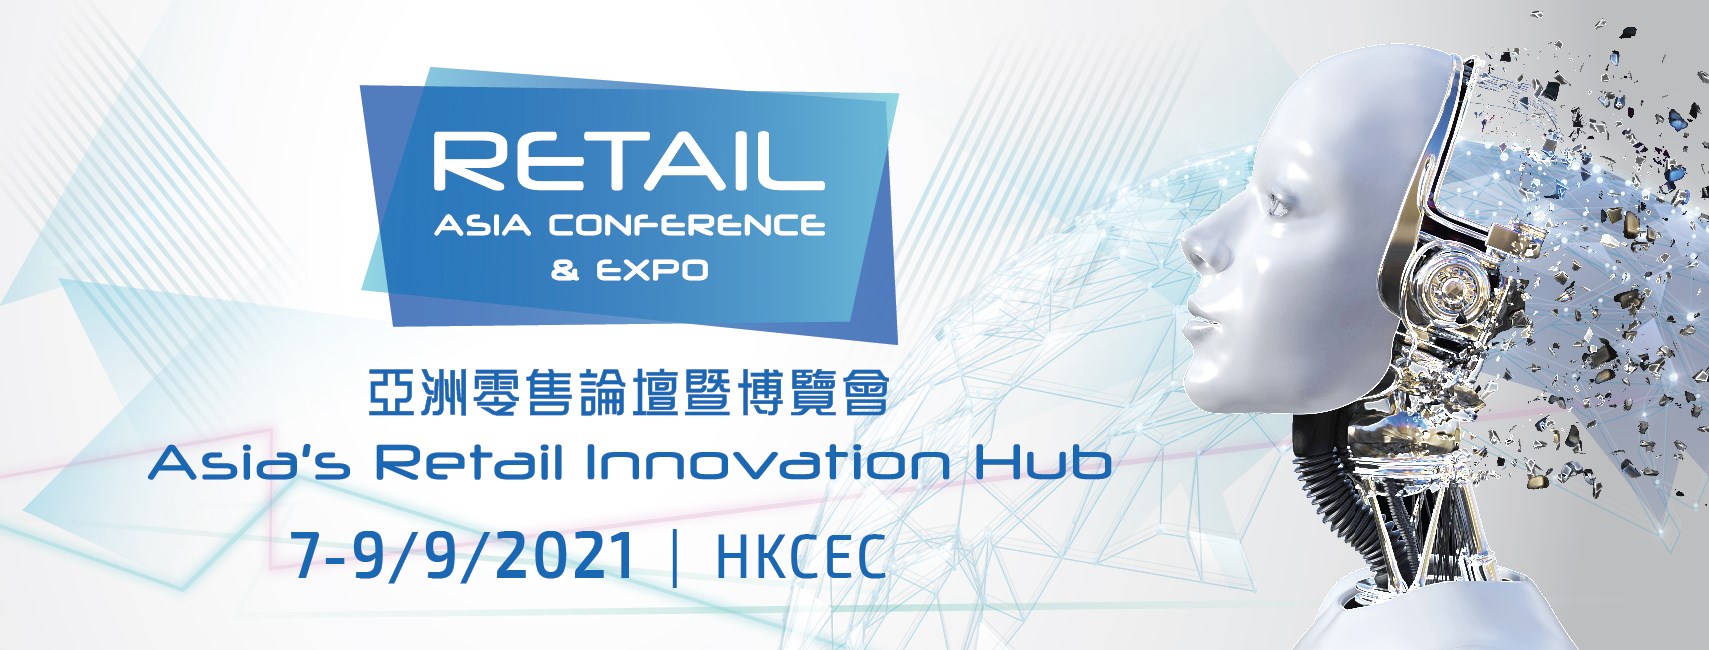 Retail Asia Conference & Expo 2021